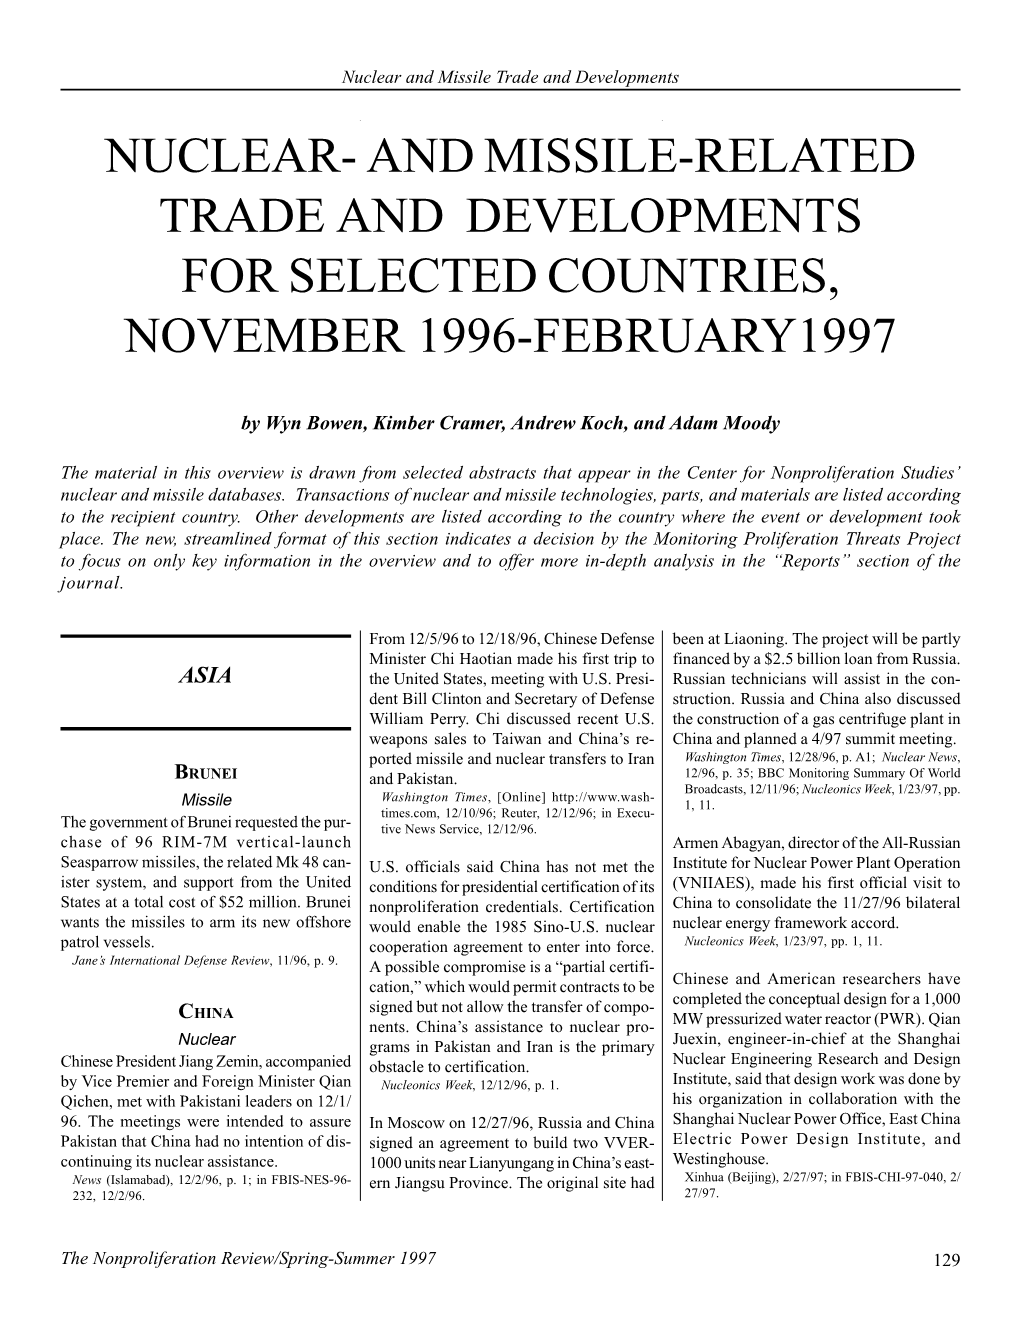 Npr 4.3: Nuclear- and Missile-Related Trade and Developments for Selected Countries, November 1996-February1997